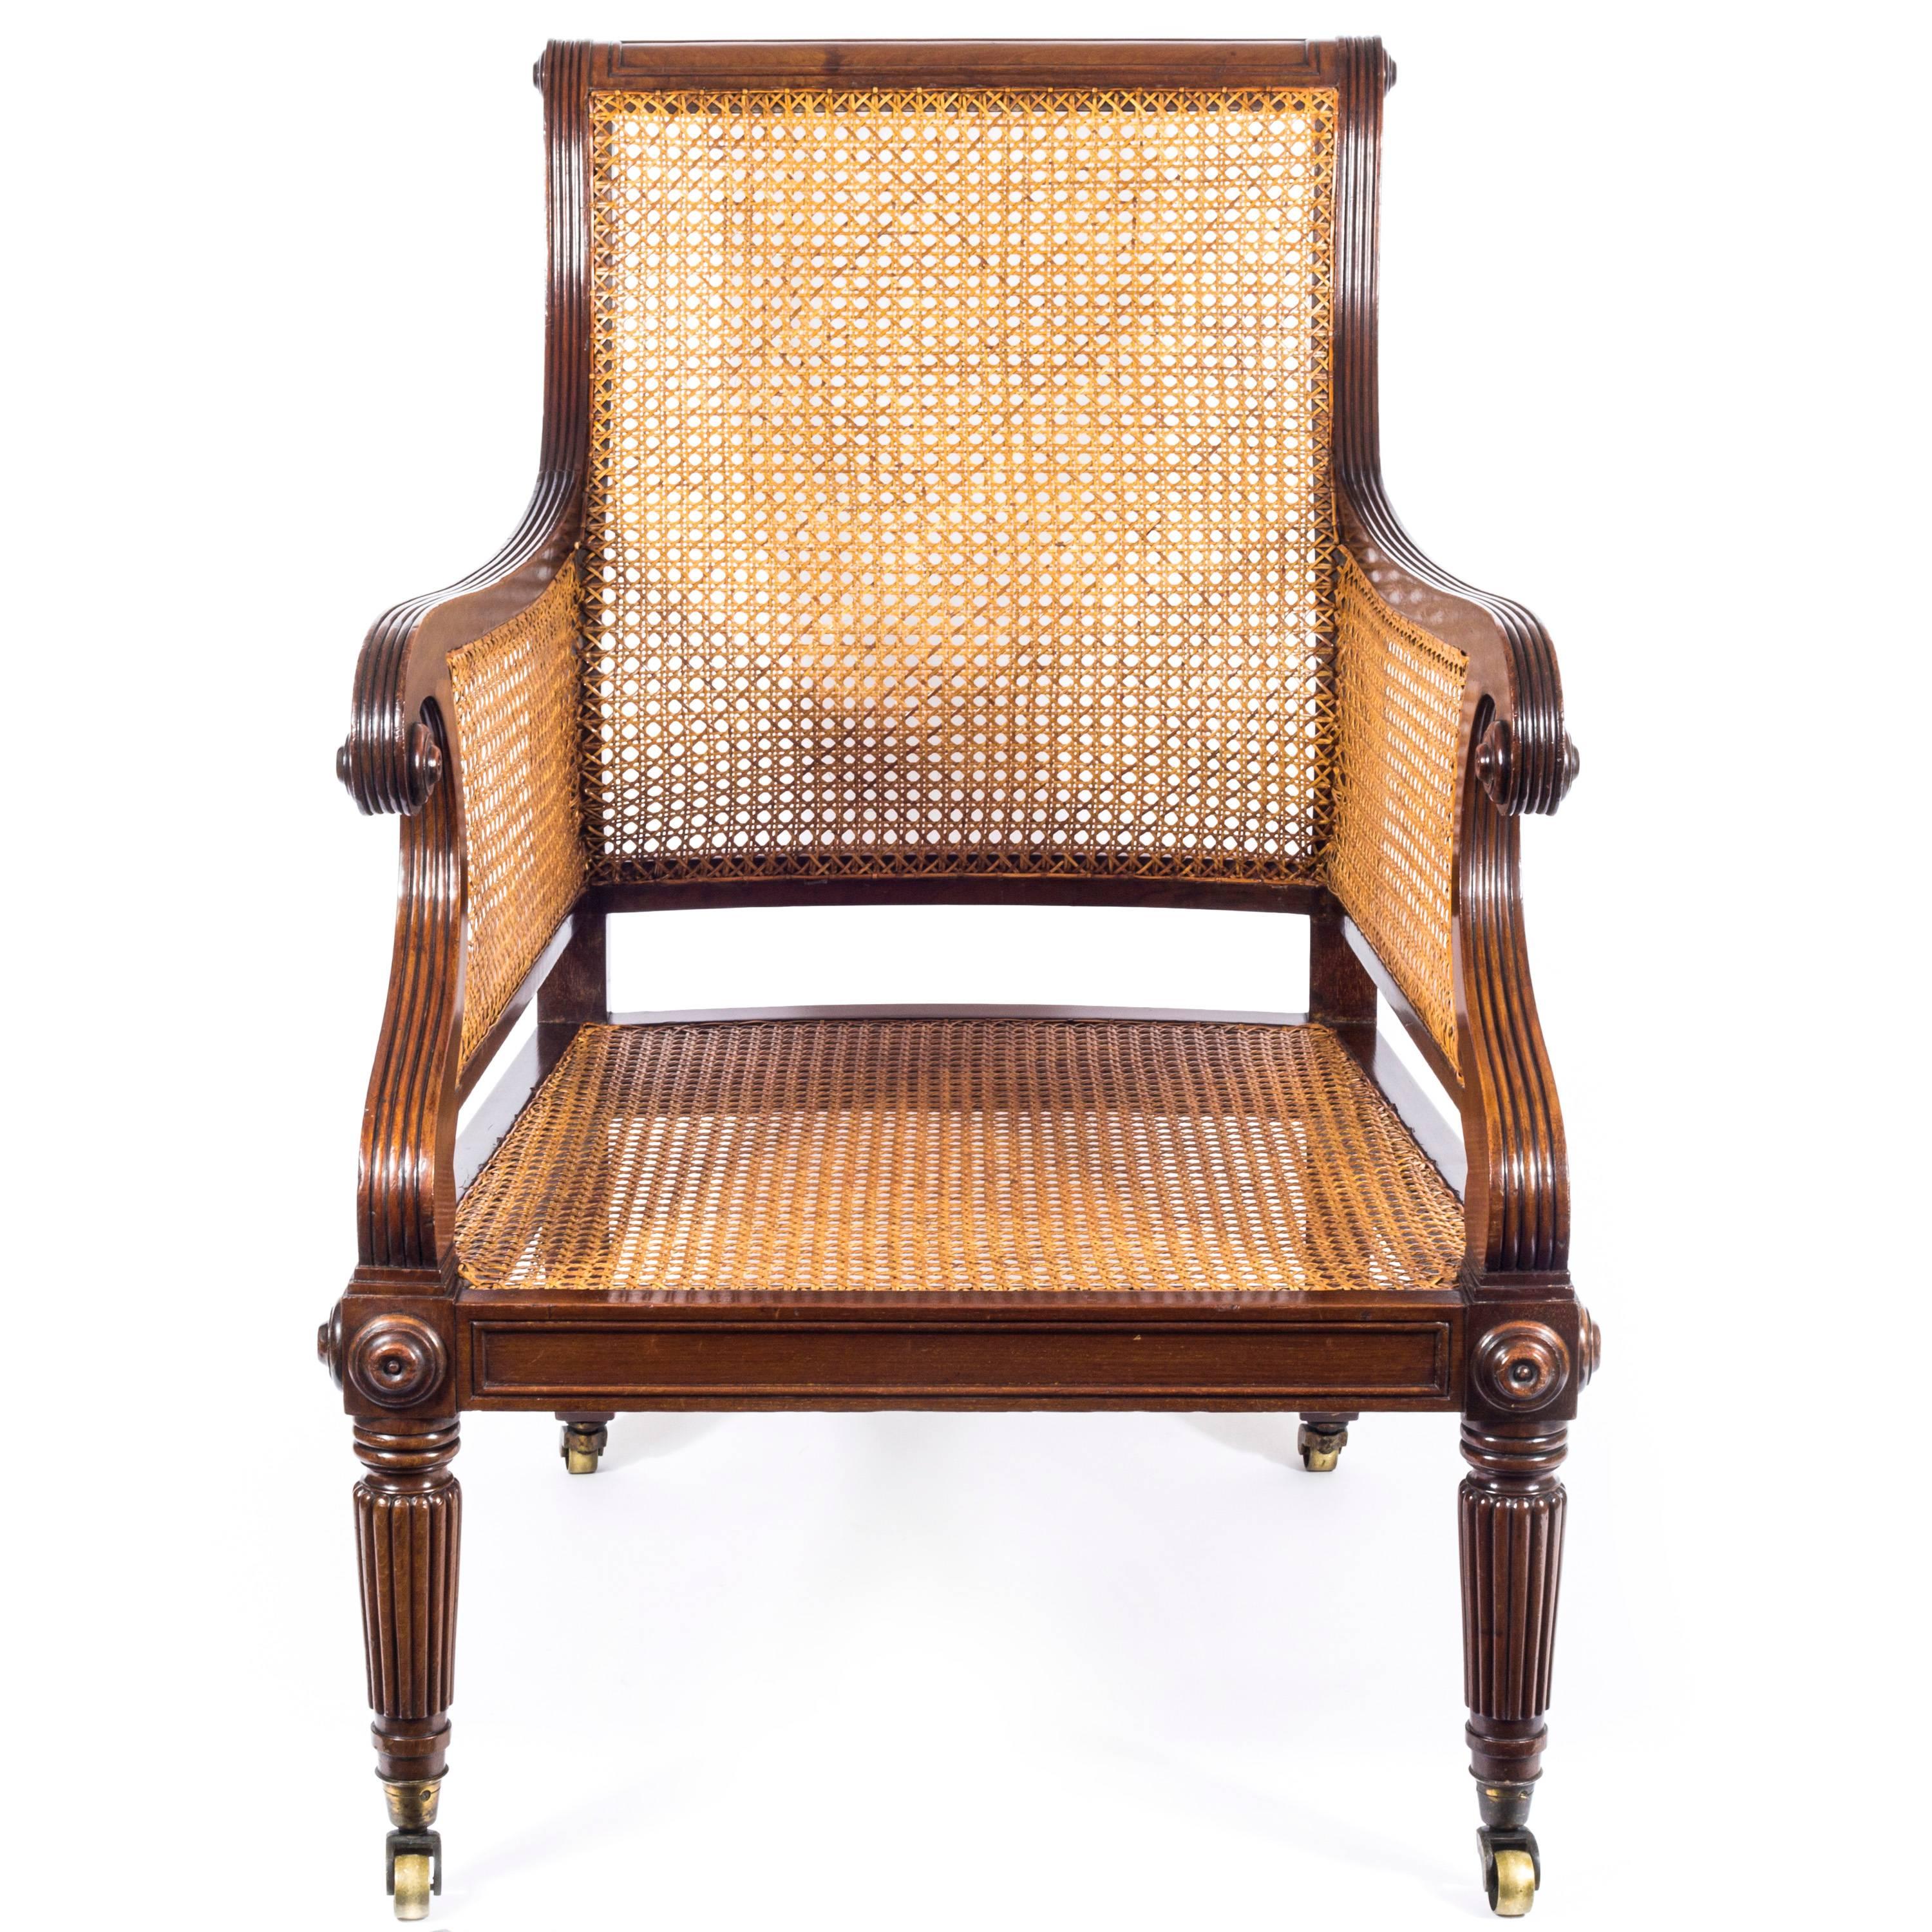 19th Century English Regency Mahogany Library Bergère Armchair Attributed to Gillows